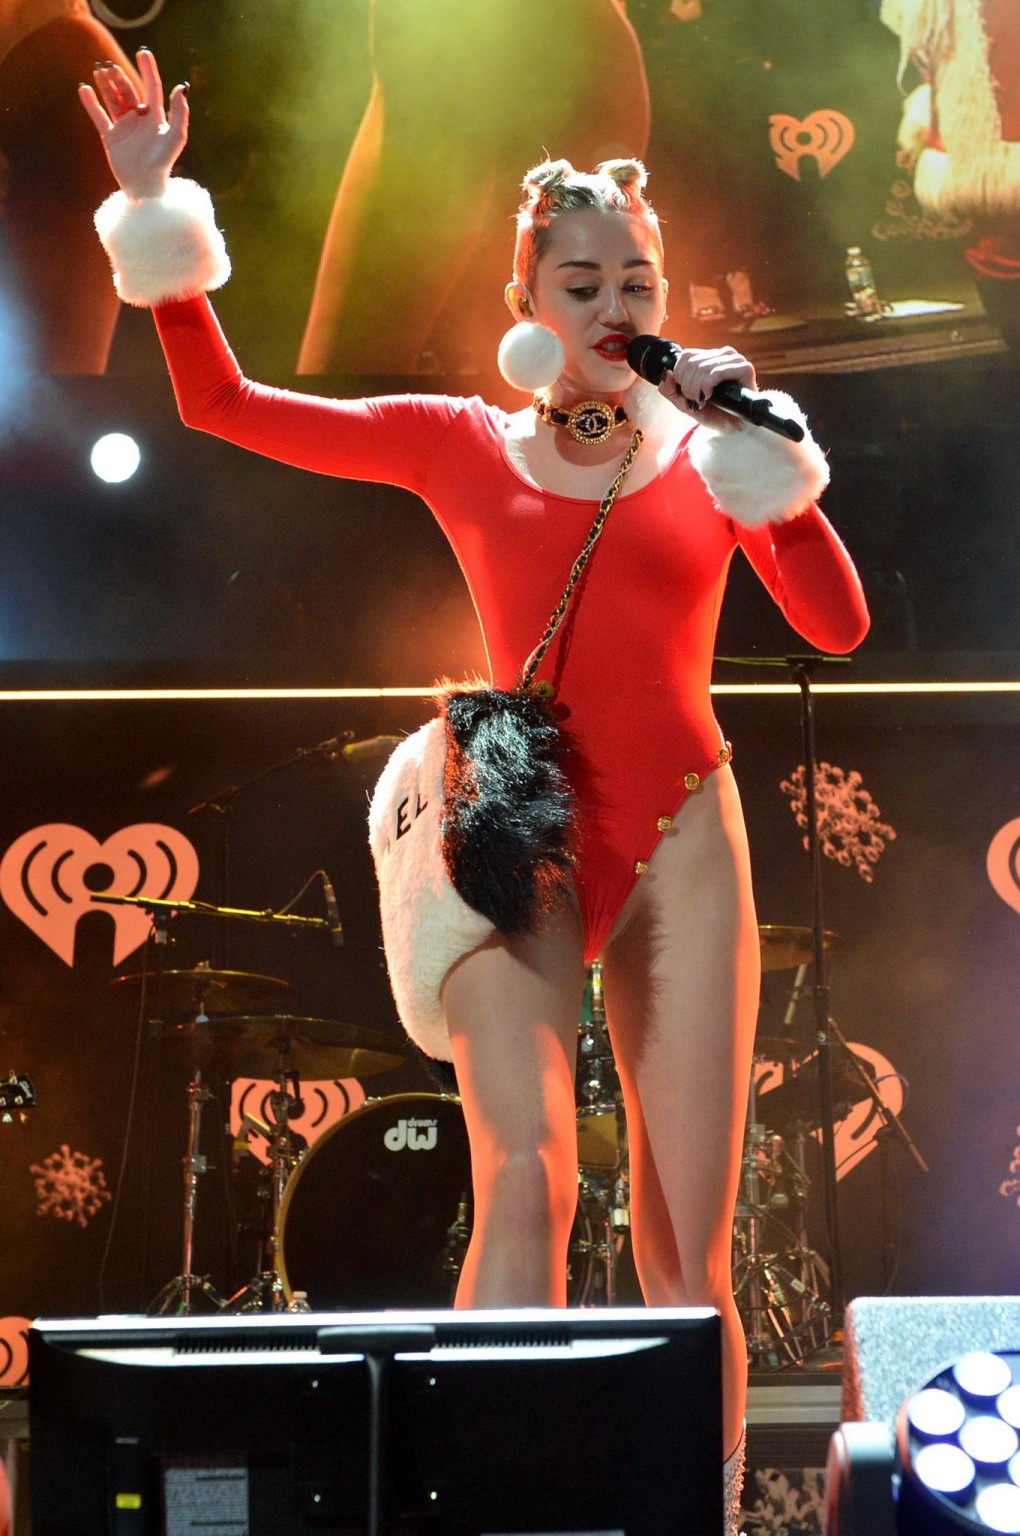 Miley Cyrus shows off pokies and ass wearing a red leotard on stage at 93.3 FLZ' #75209922